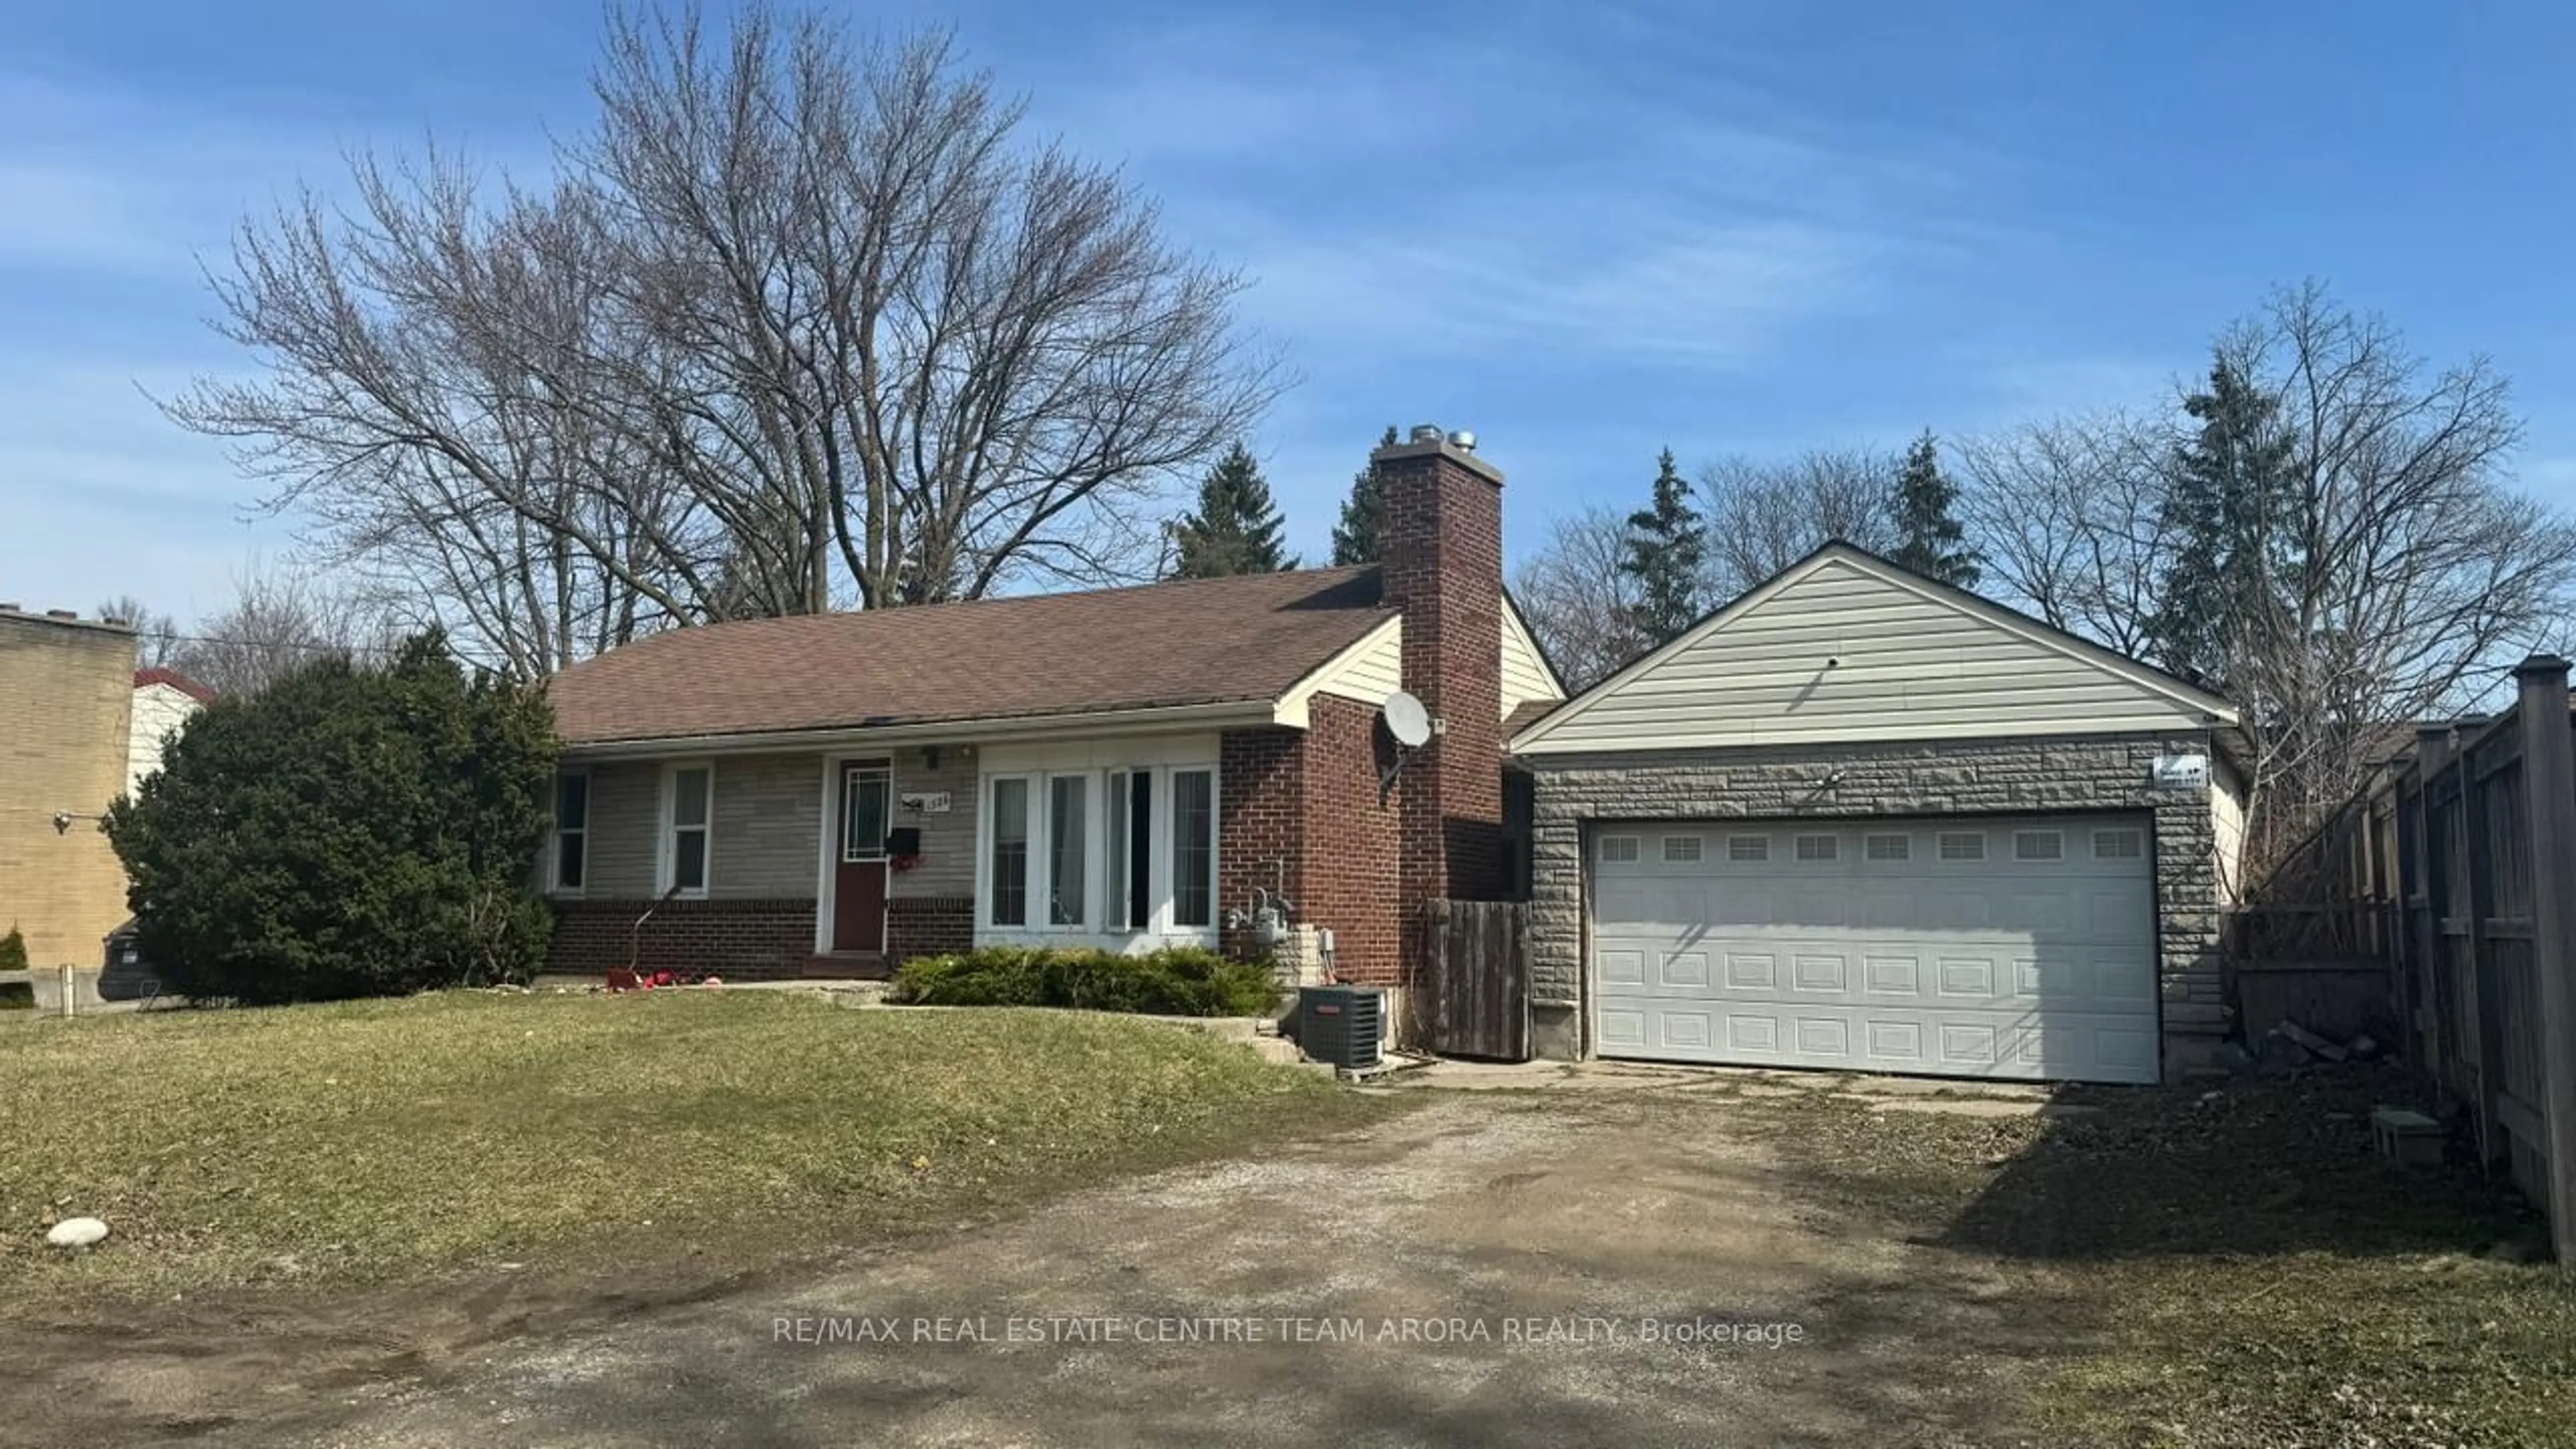 Home with brick exterior material for 1326 Highbury Ave, London Ontario N5Y 4W9